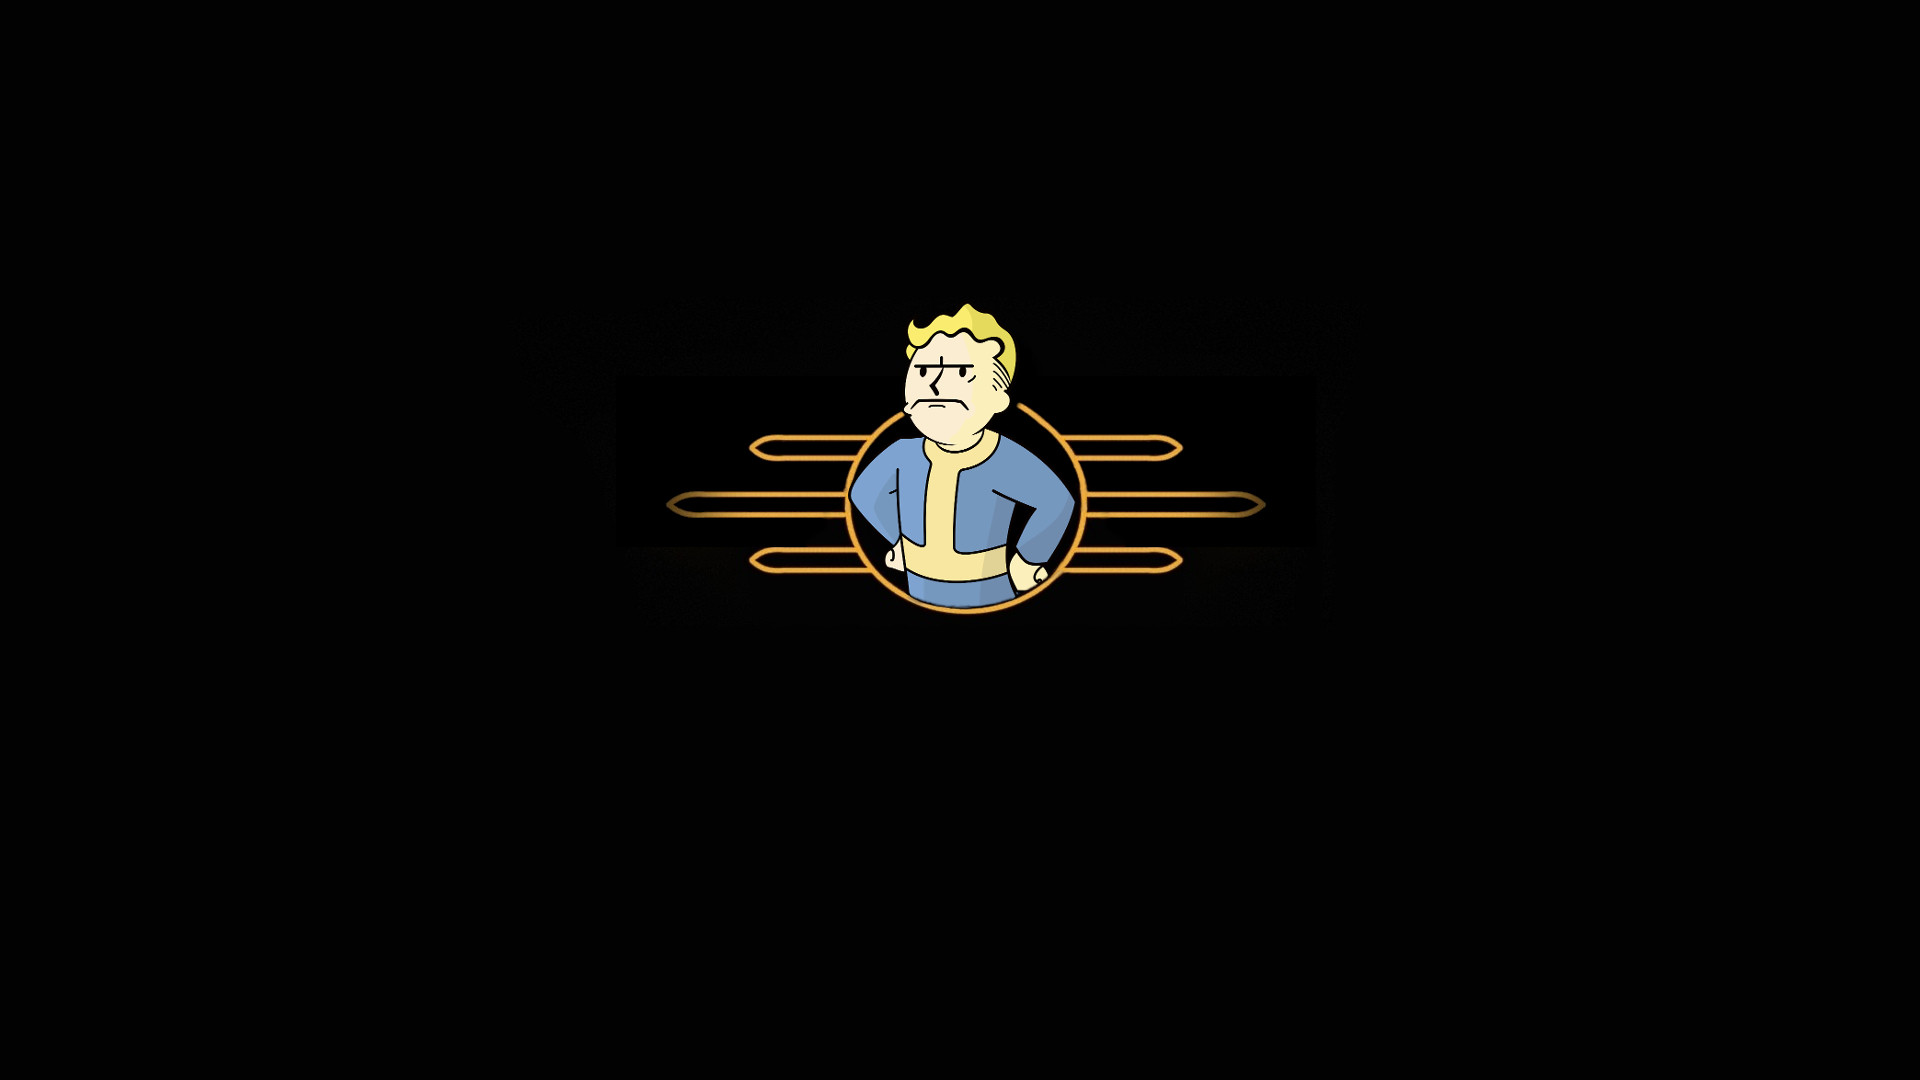 1920x1080 ... fallout wallpapers hd desktop and mobile backgrounds ...